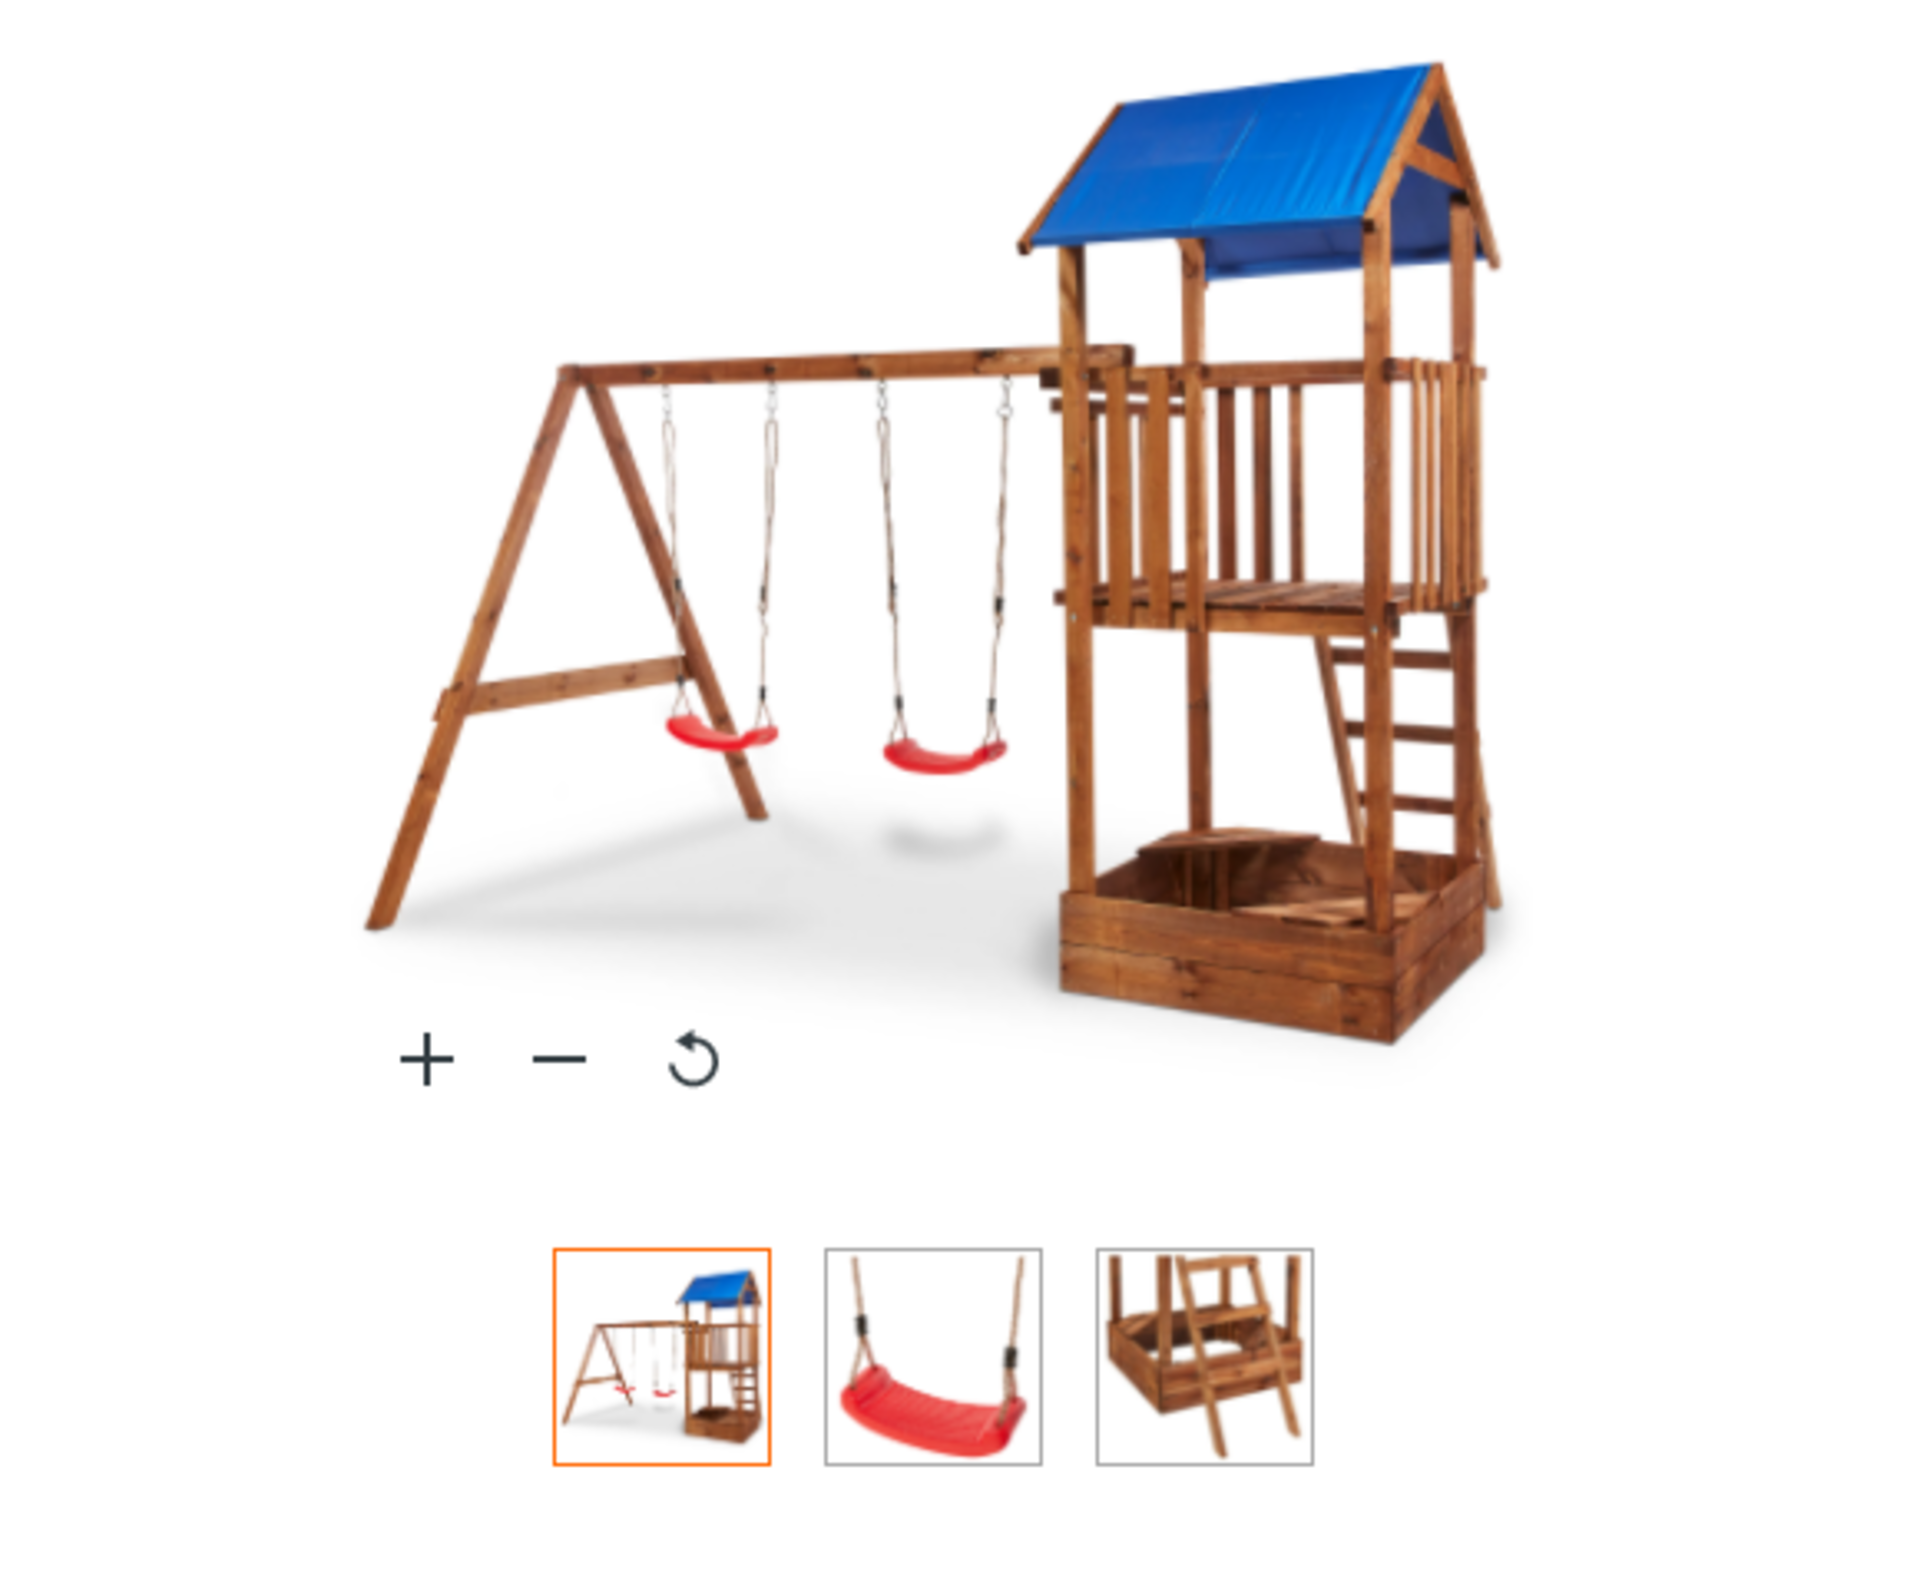 New Janer Wooden Swing Set. This Janek swing set comes with swing seats, swing hooks, tower, roof